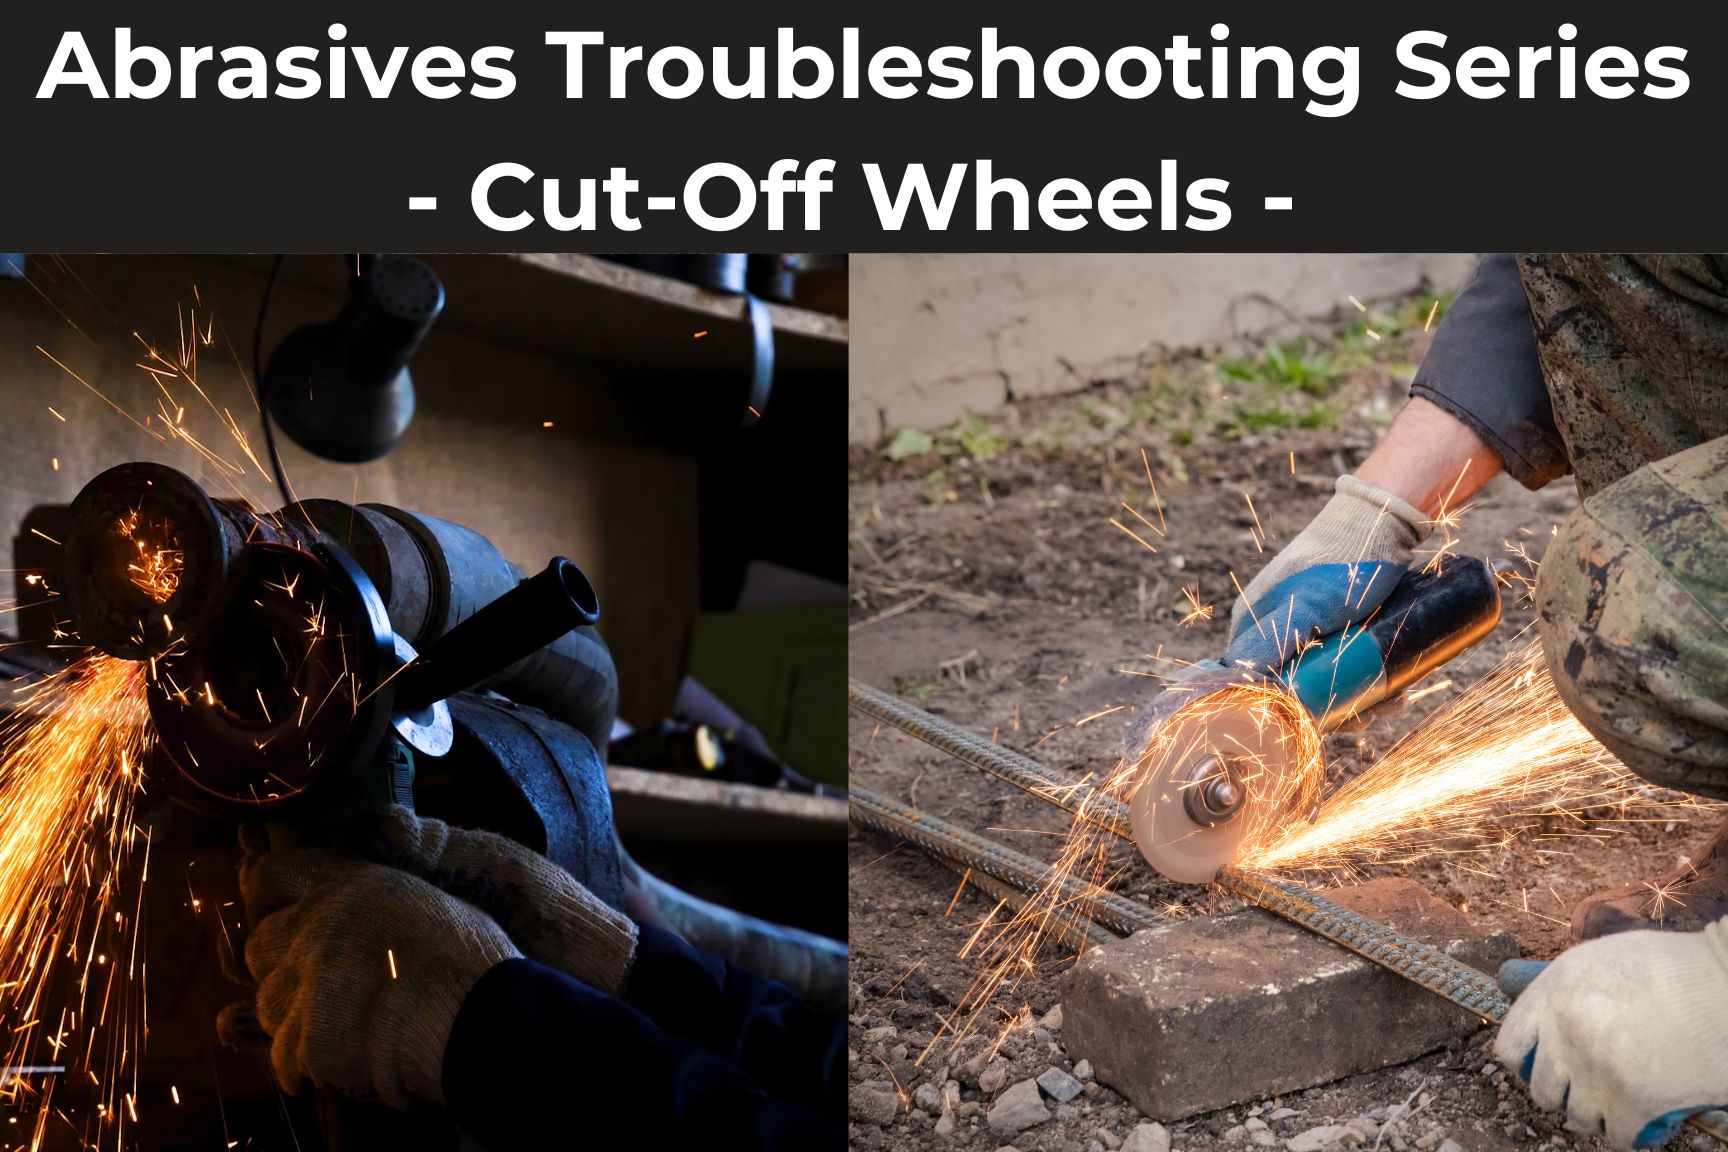 Troubleshooting Common Abrasive Tool Issues - Cut-Off Wheels